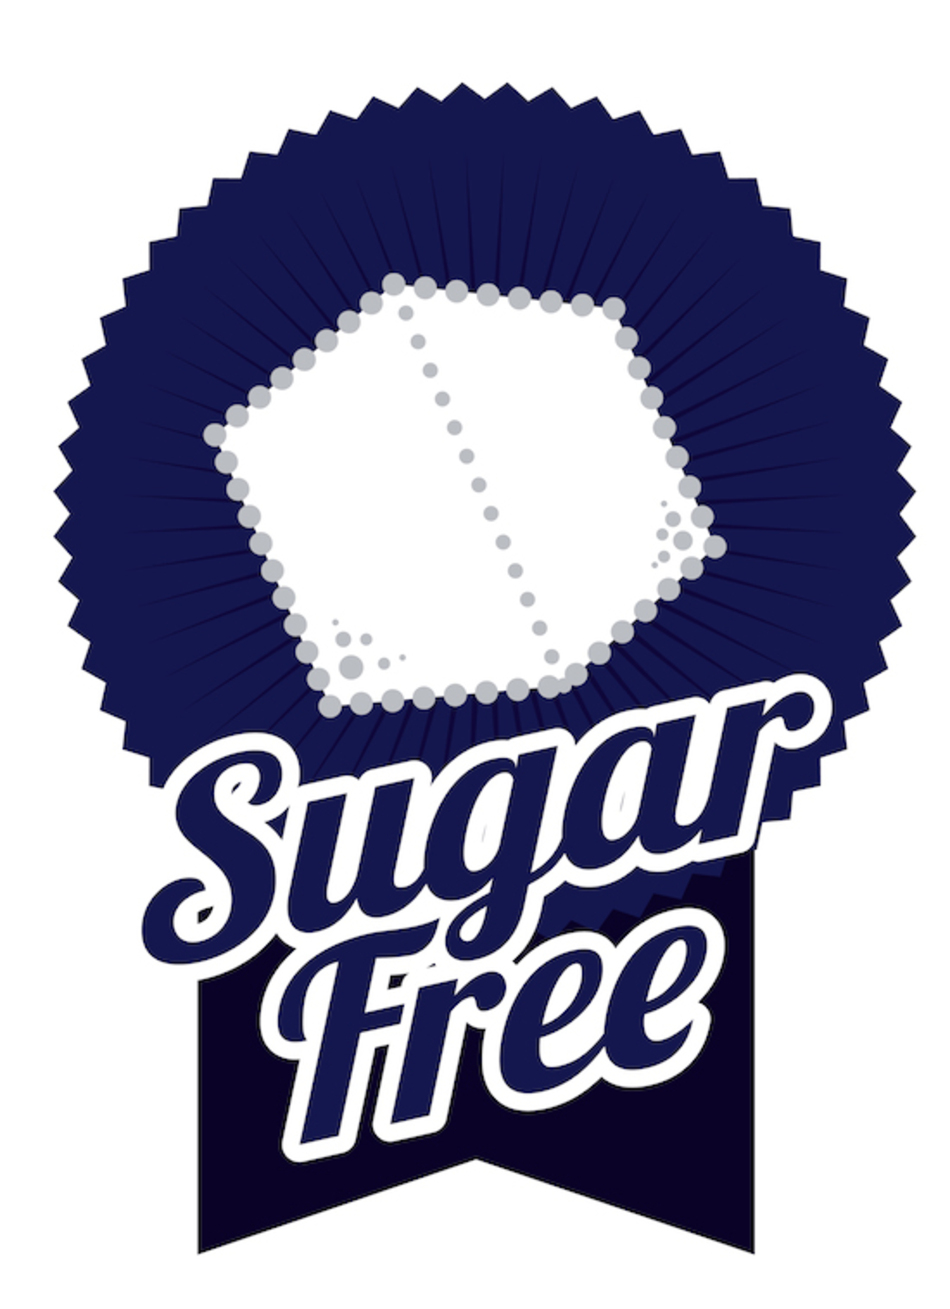 The Sugar-Free Challenge: Healthy Idea or Not?